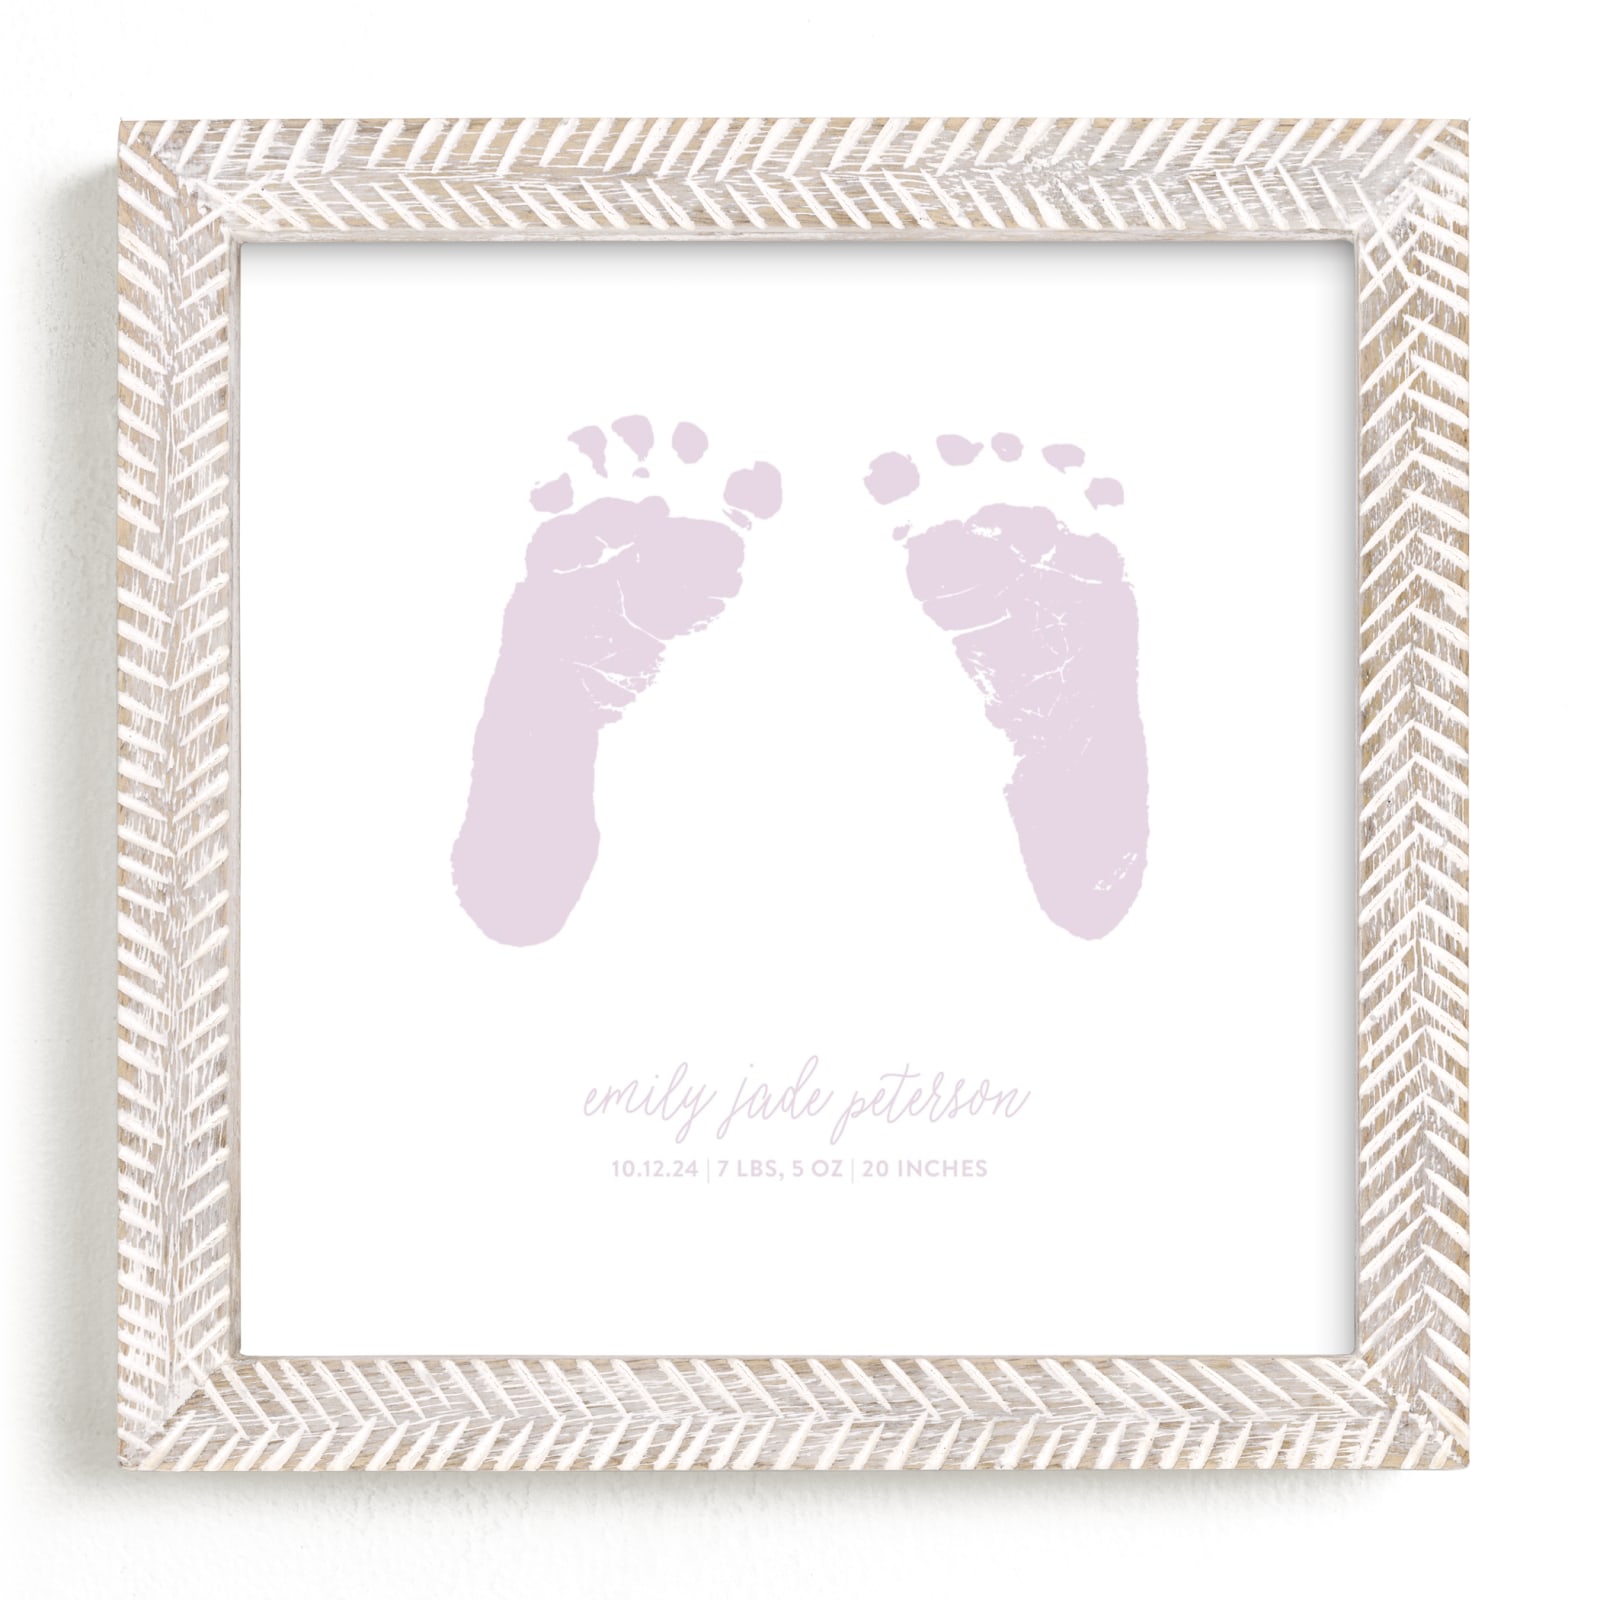 This is a purple photos to art by Minted Custom called Custom Footprints Letterpress Art.